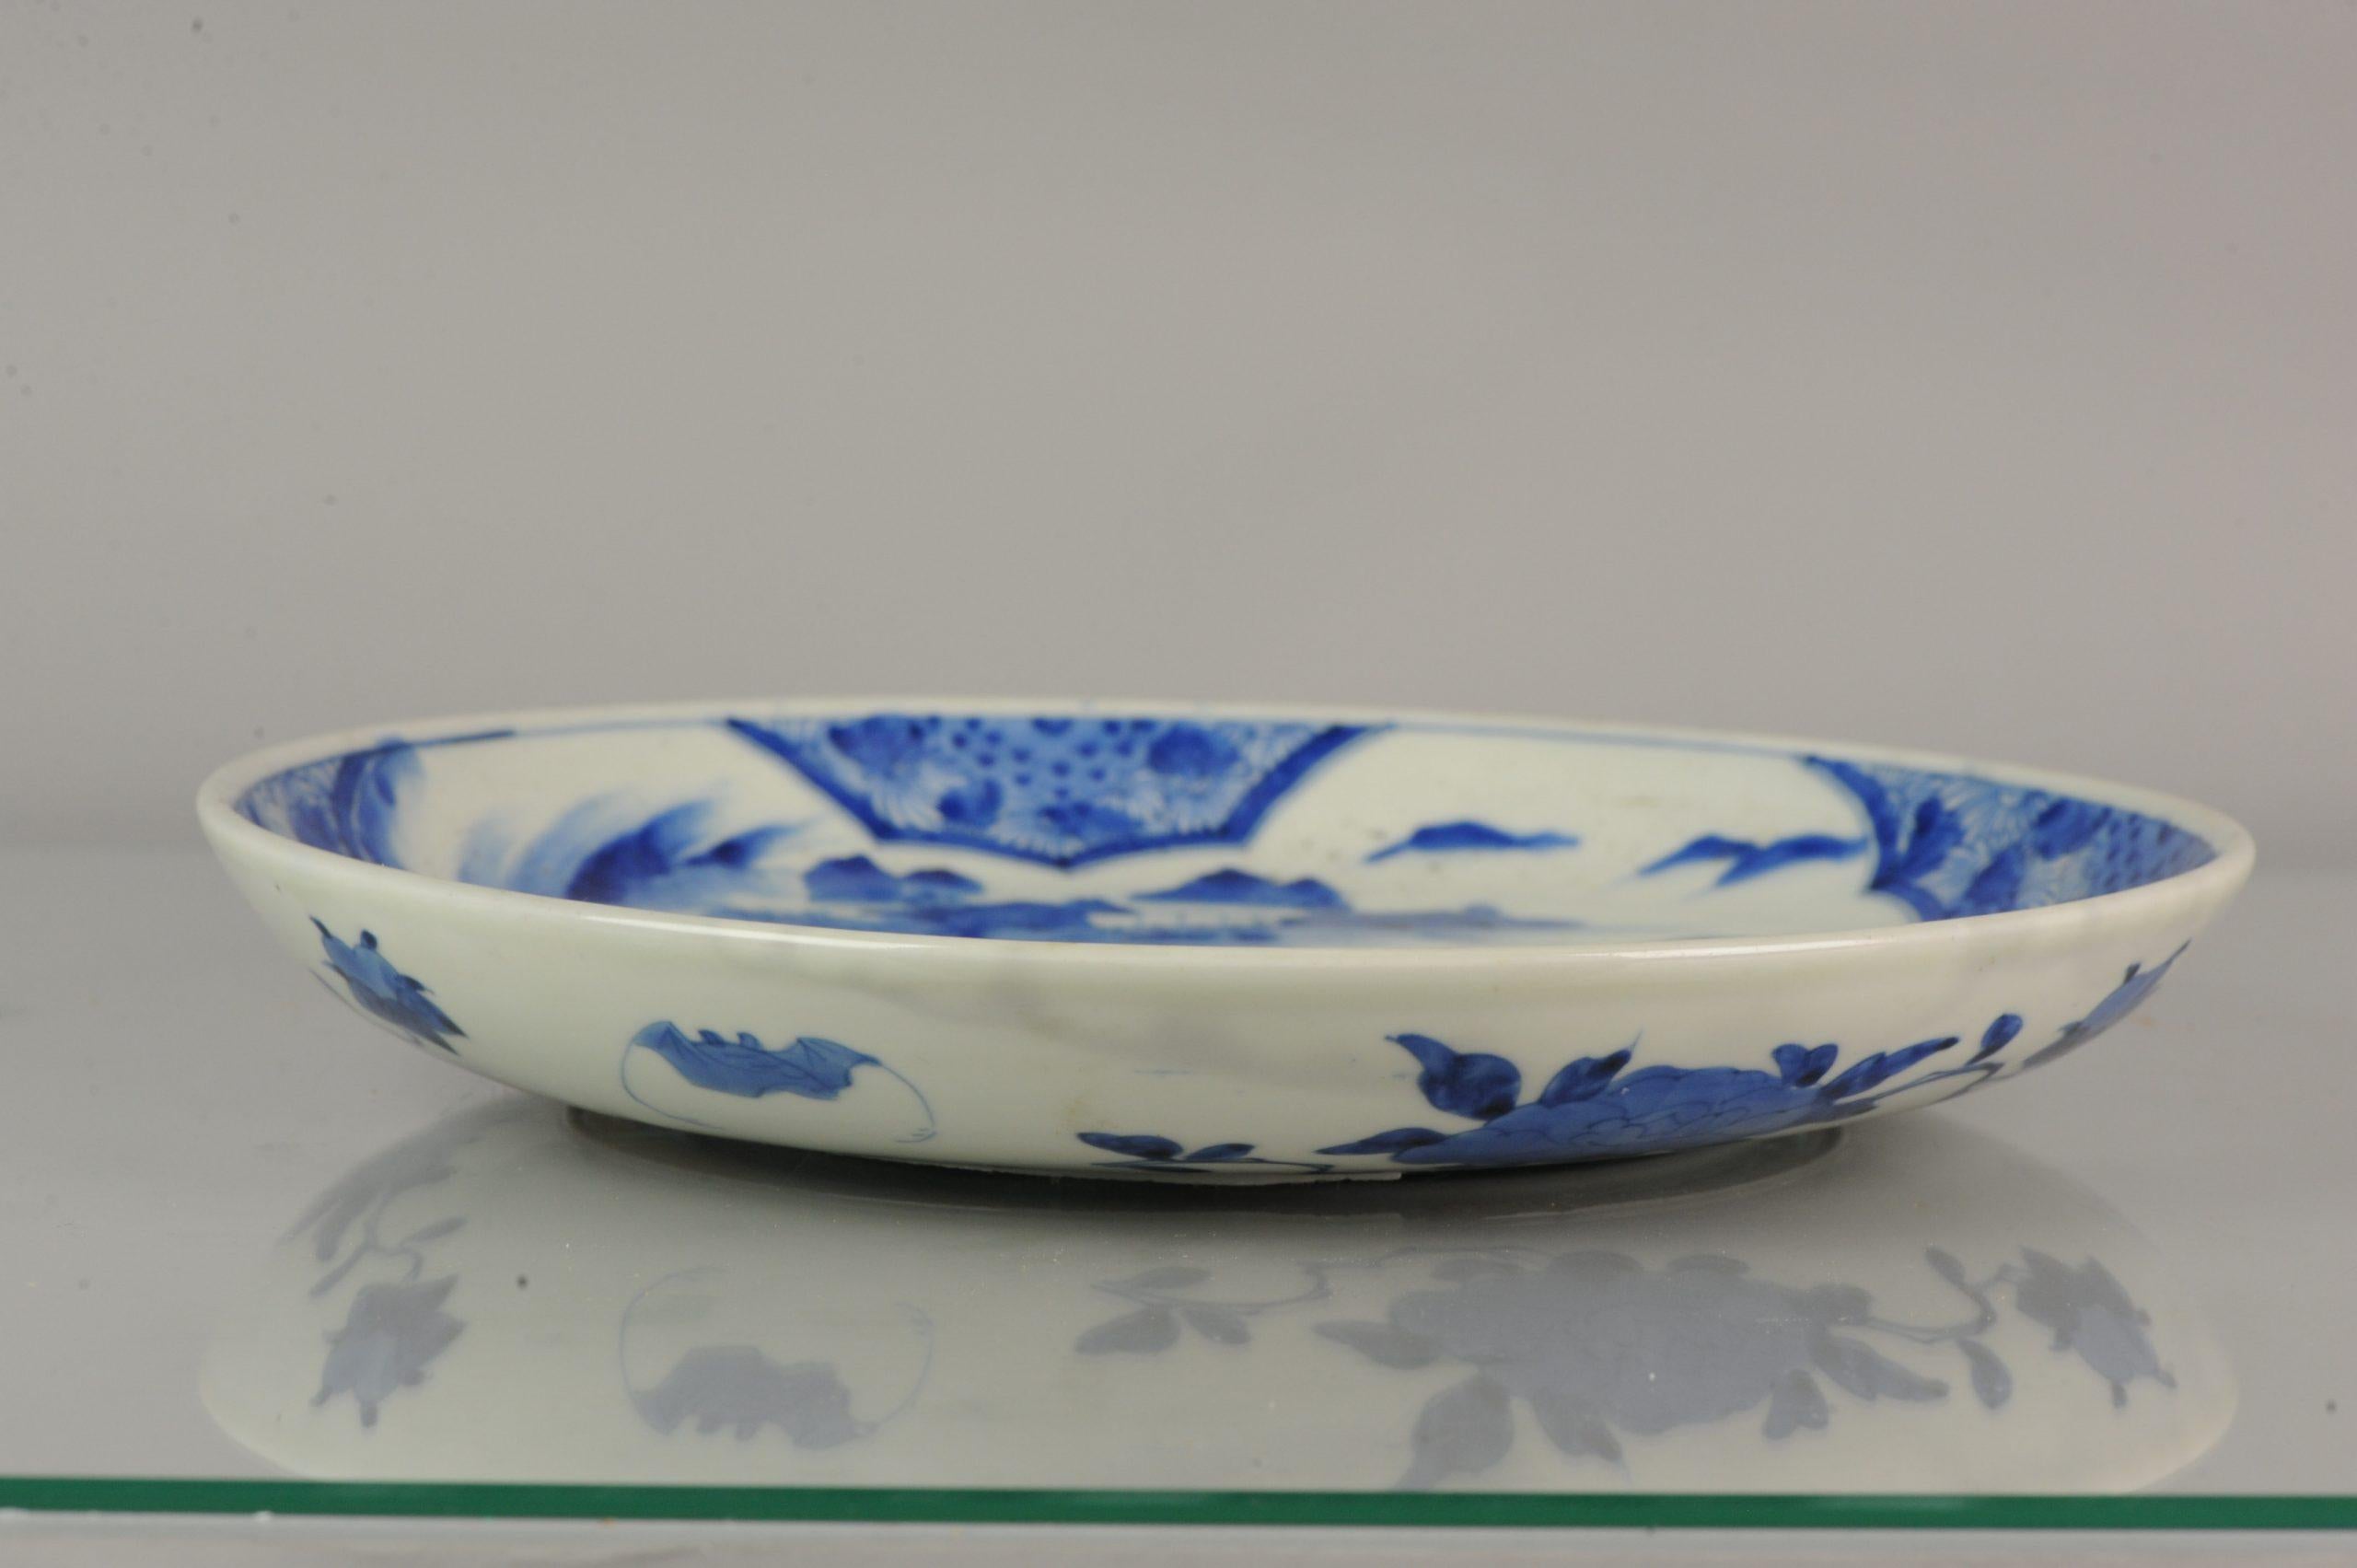 Nice piece. Lovely richly decorated landscape scene.

Additional information:
Material: Porcelain & Pottery
Type: Plates
Region of Origin: Japan
Period: 19th Century 
Age: 19th century
Condition: Overall Condition; 1 rim is missing at the back, must